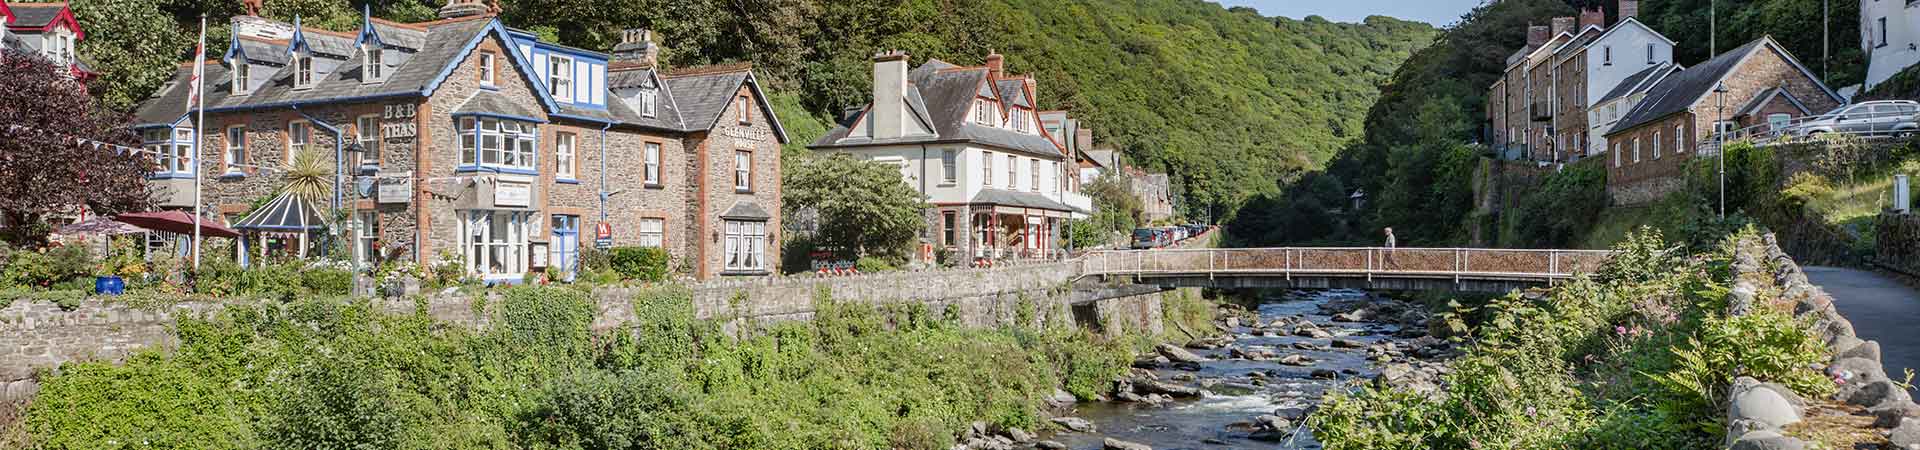 Cottages in Lynton